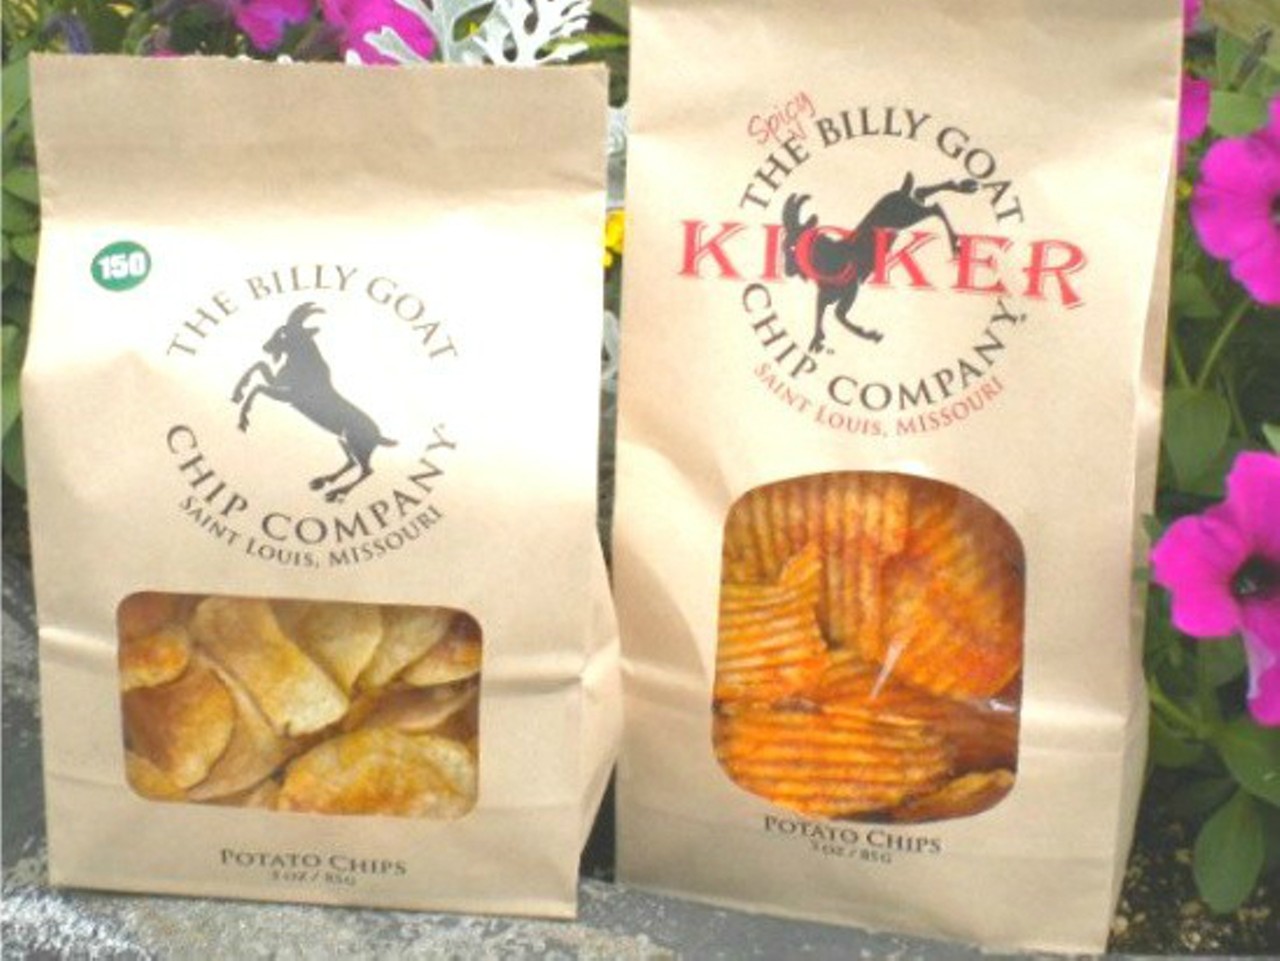 Billy Goat Chips
Billy Goat Chips so effortlessly crunchy and substantial that you won't even be tempted to tilt that brown bag into your maw. You'll want to savor these babies chip by chip.
Photo credit: Deborah Hyland